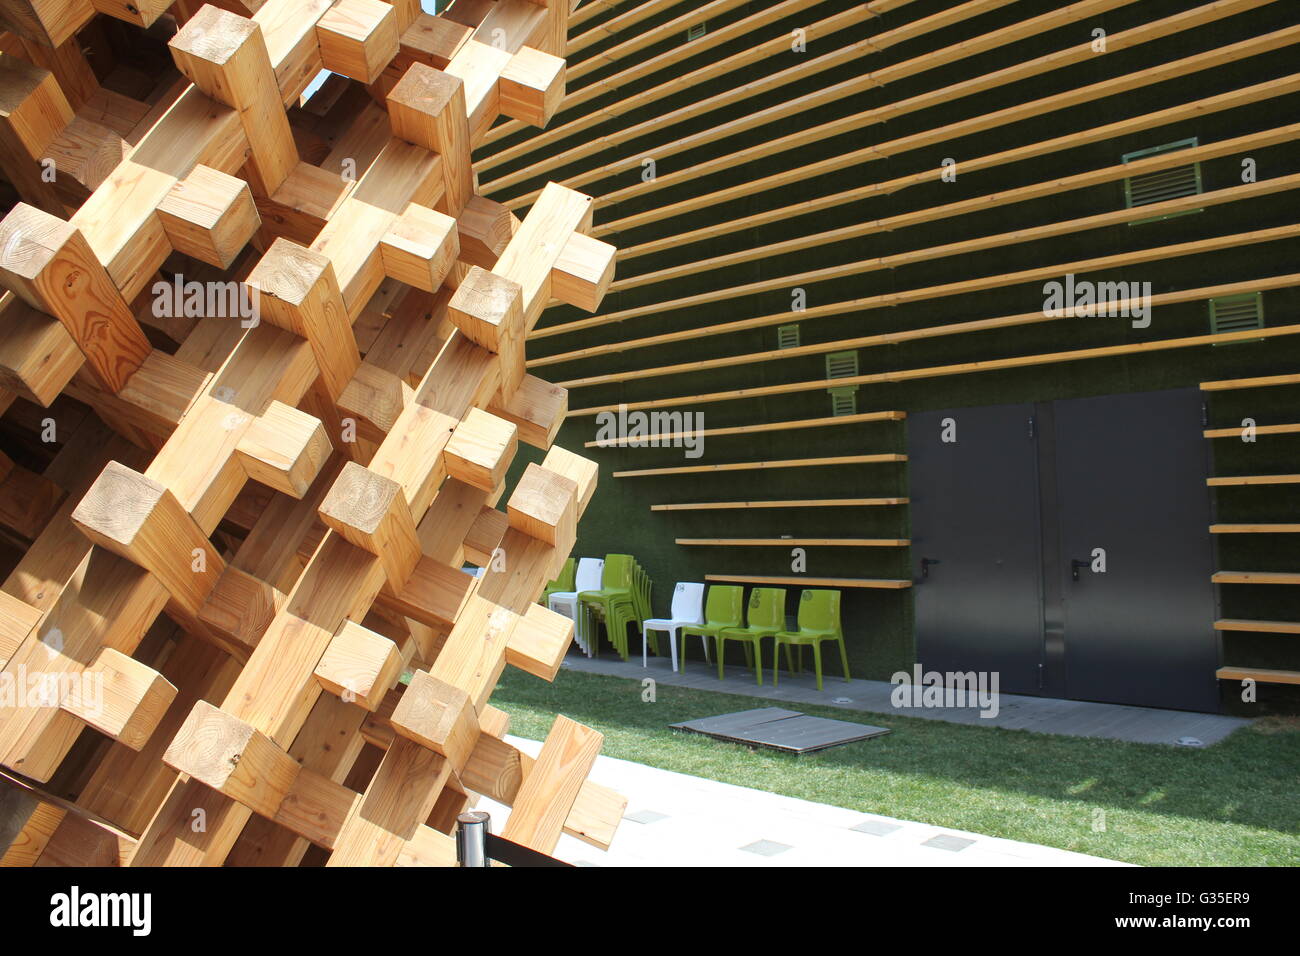 MILAN, ITALY - JUNE 29 2016: Architectural close up of Japanese Pavilion an Expo 2015 in Milan, with its wooden grid Stock Photo